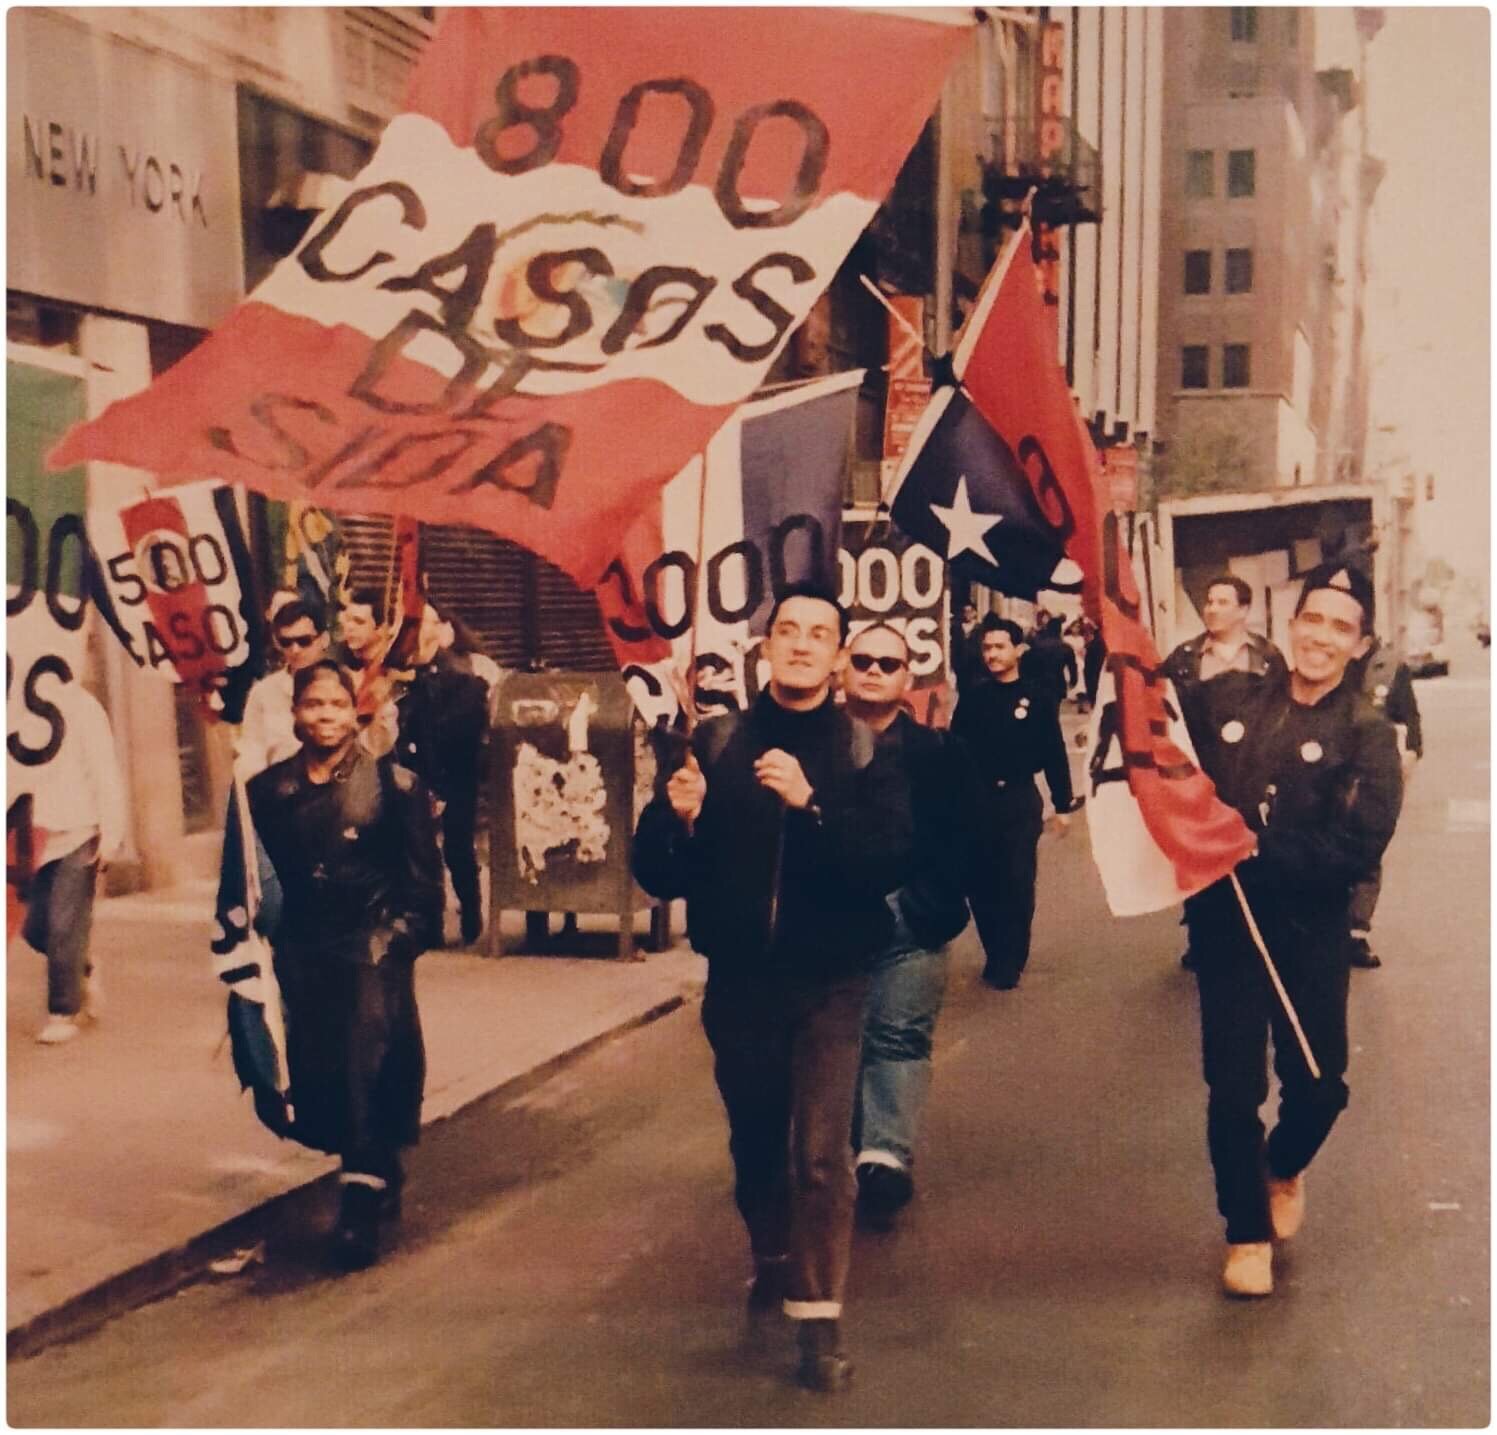  ACT Up Americas’ permit to march at the 1991 Hispanic Day Parade was granted but then revoked at the last minute. The activists decided to march alongside the parade carrying large flags of Latin American countries—Peru, Mexico, Honduras, Venezuela,